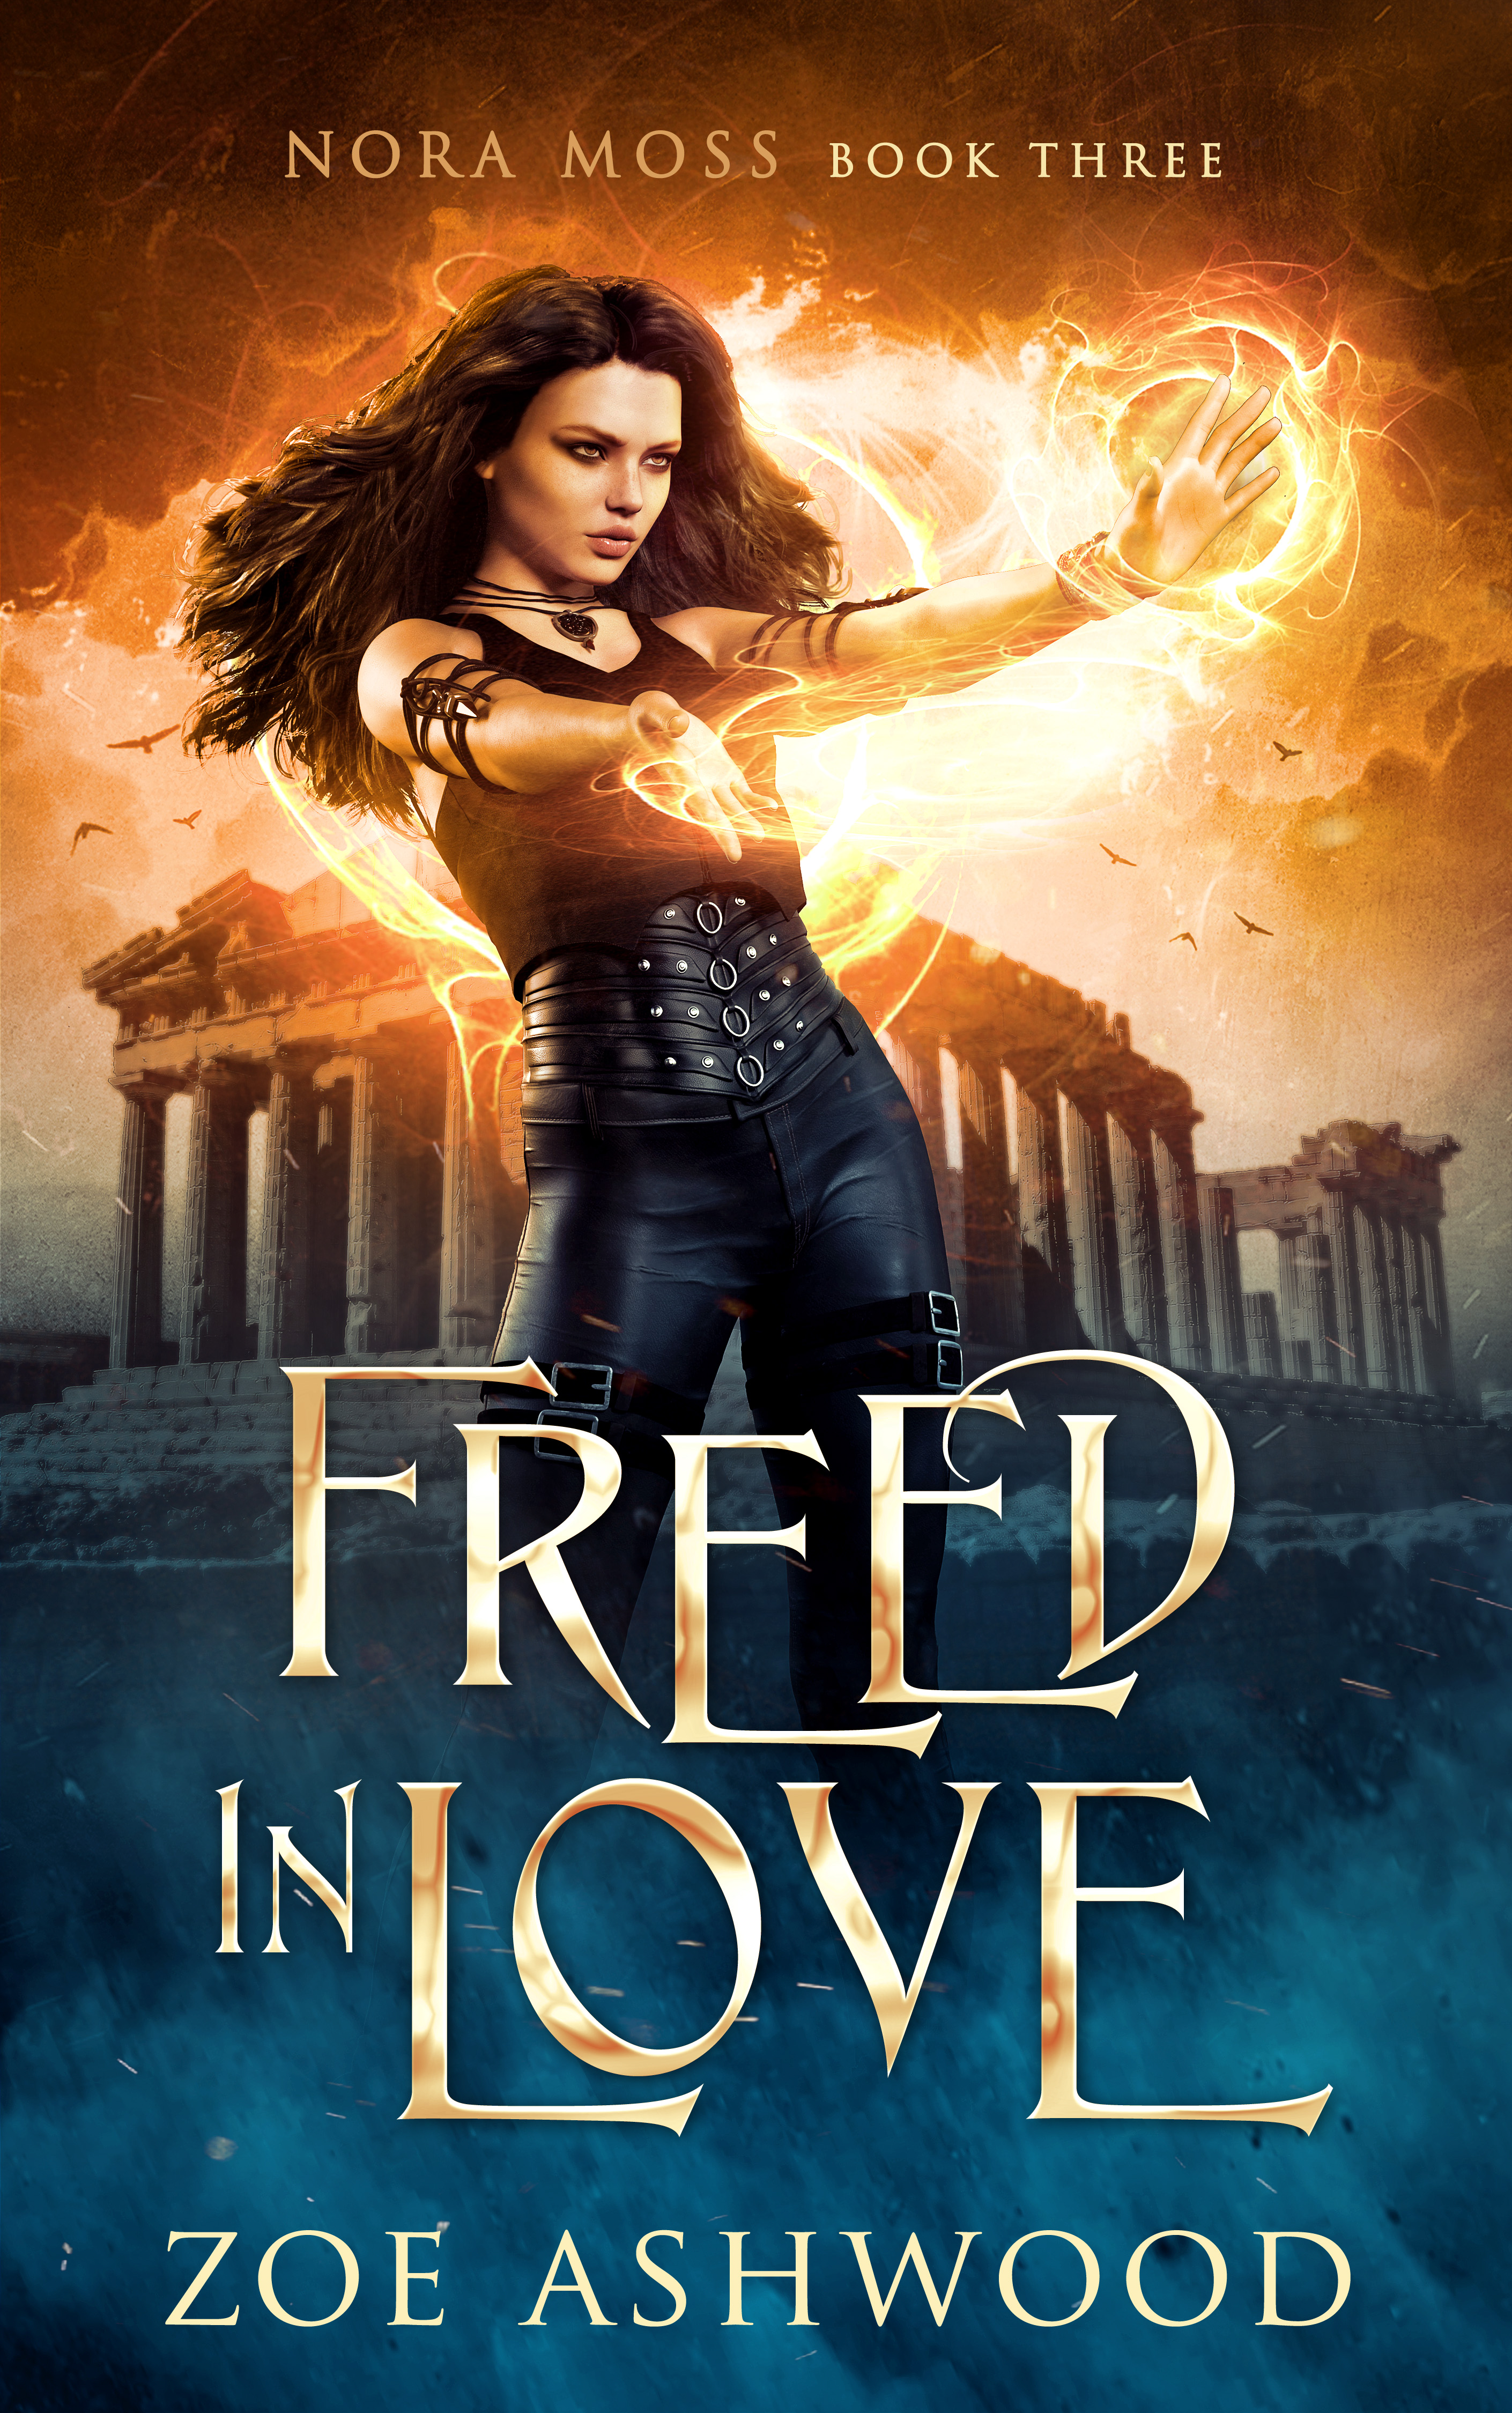 Freed in Love by Zoe Ashwood - Nora Moss #2 - reverse harem paranormal romance